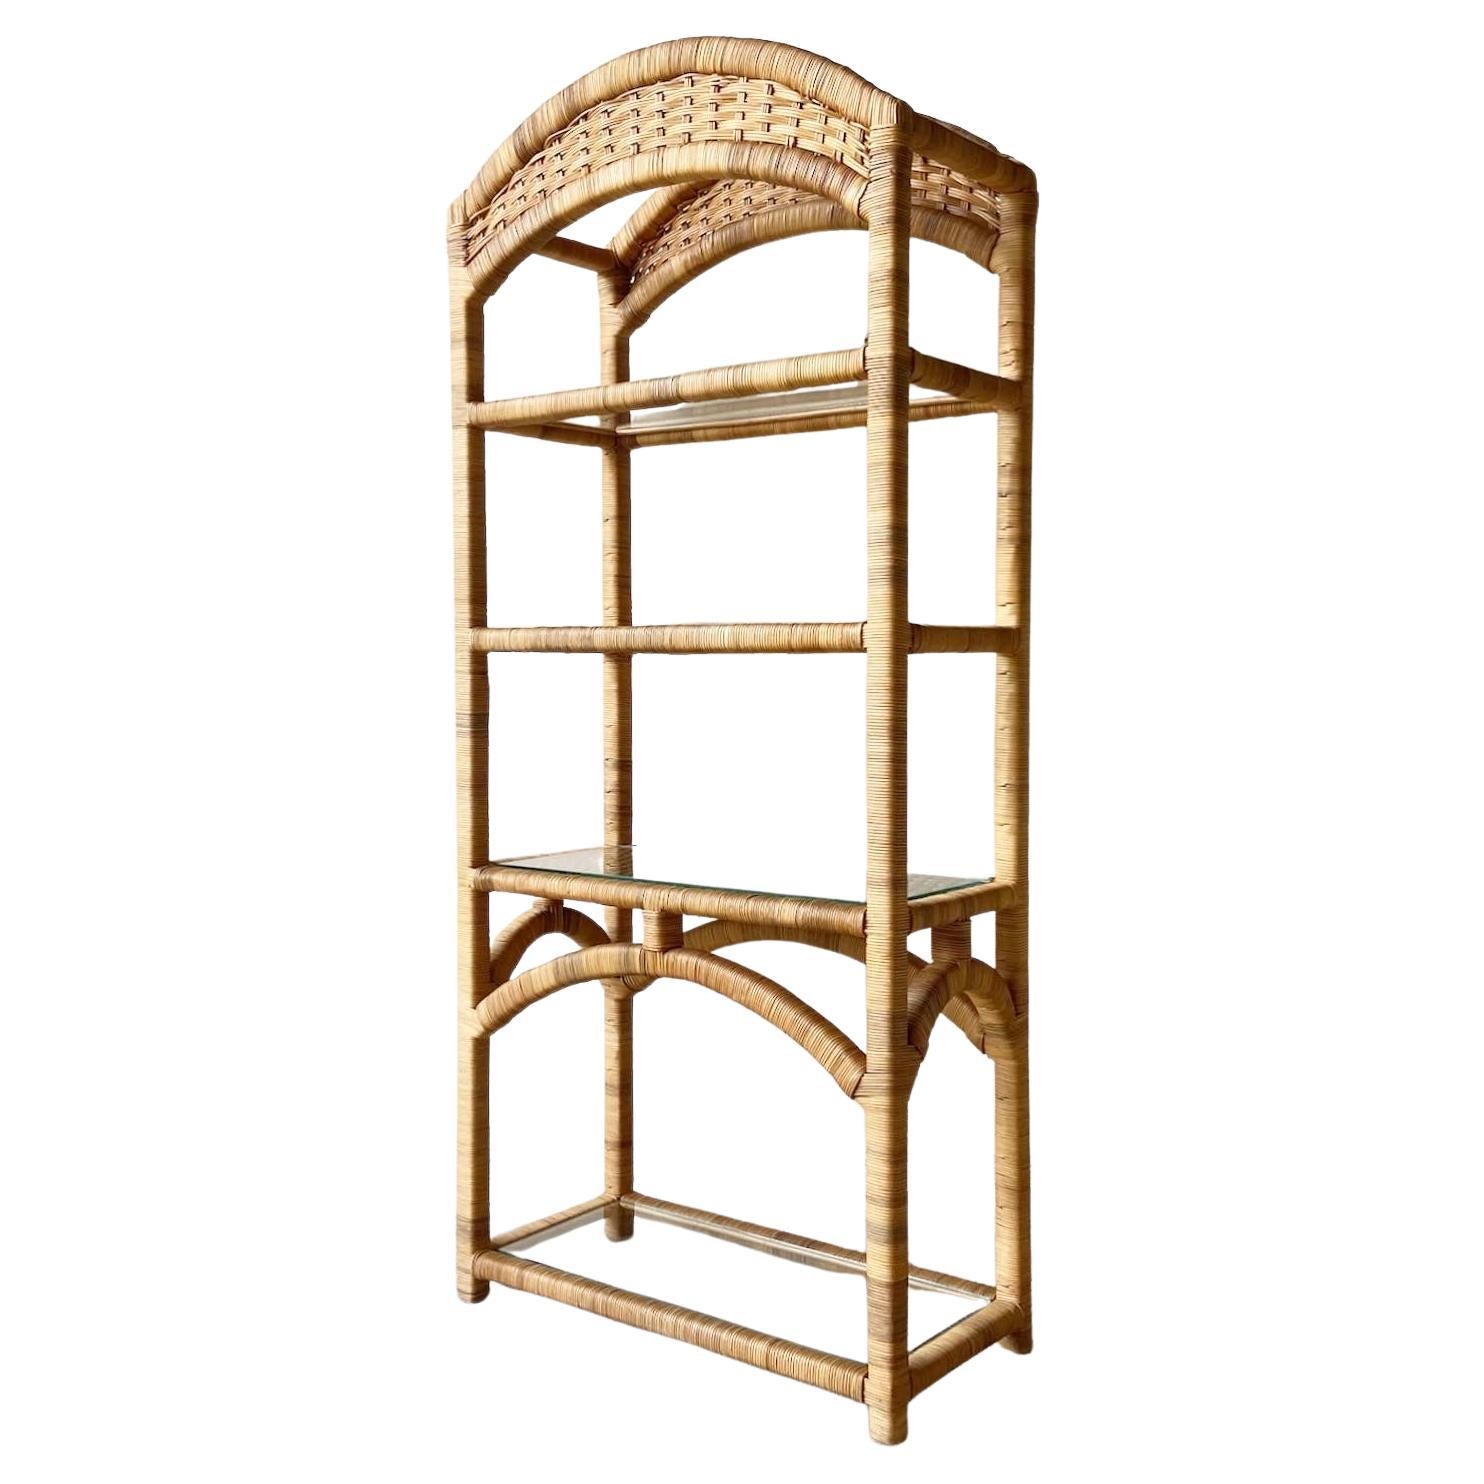 Boho Chic Rattan Woven Etagere with Glass Shelves For Sale